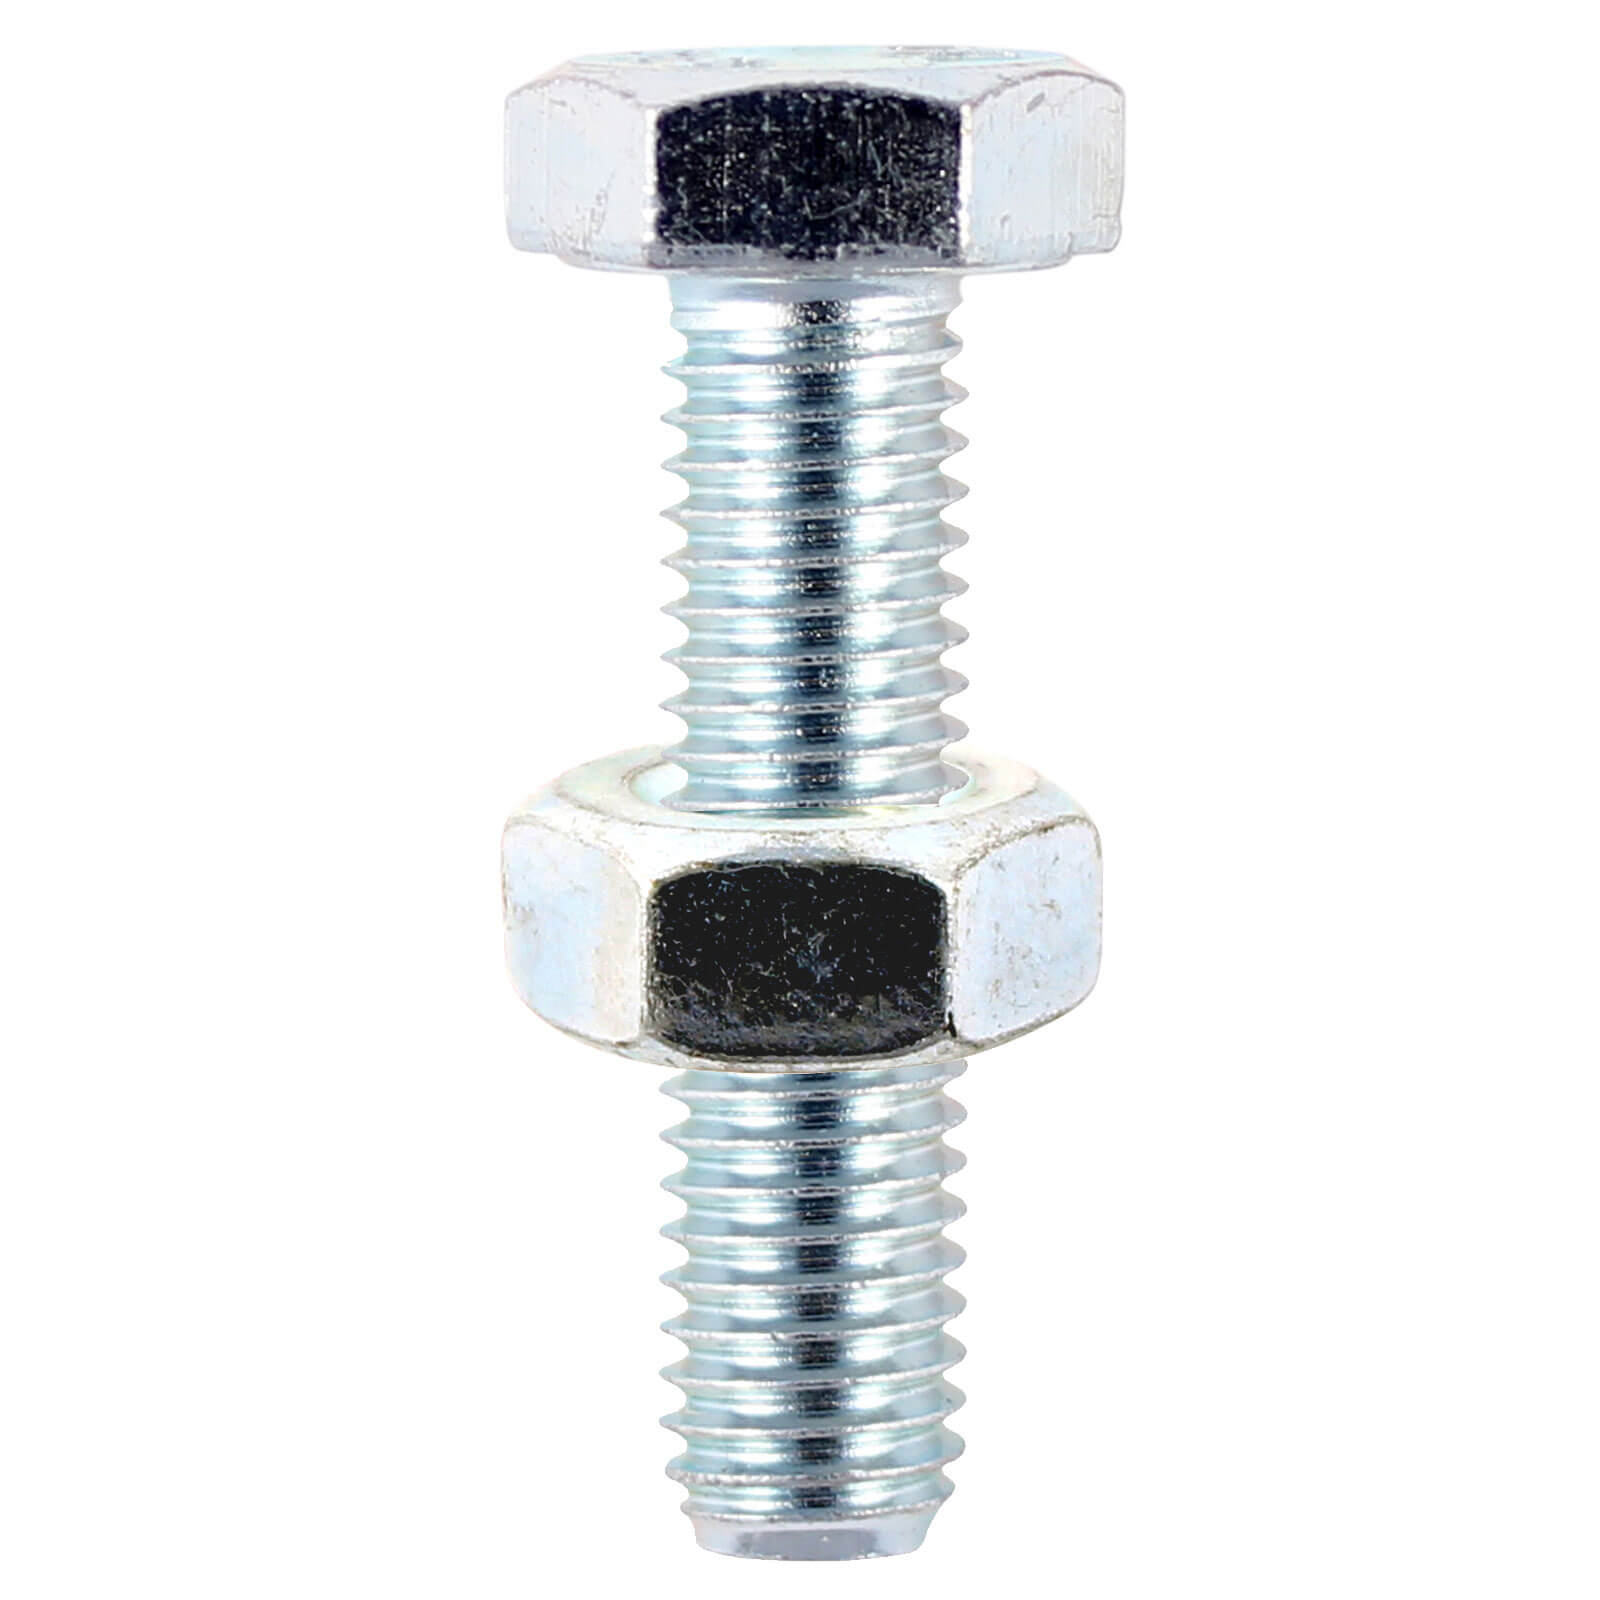 Hexagon Set Screw and Nuts Stainless Steel M10 30mm Pack of 2